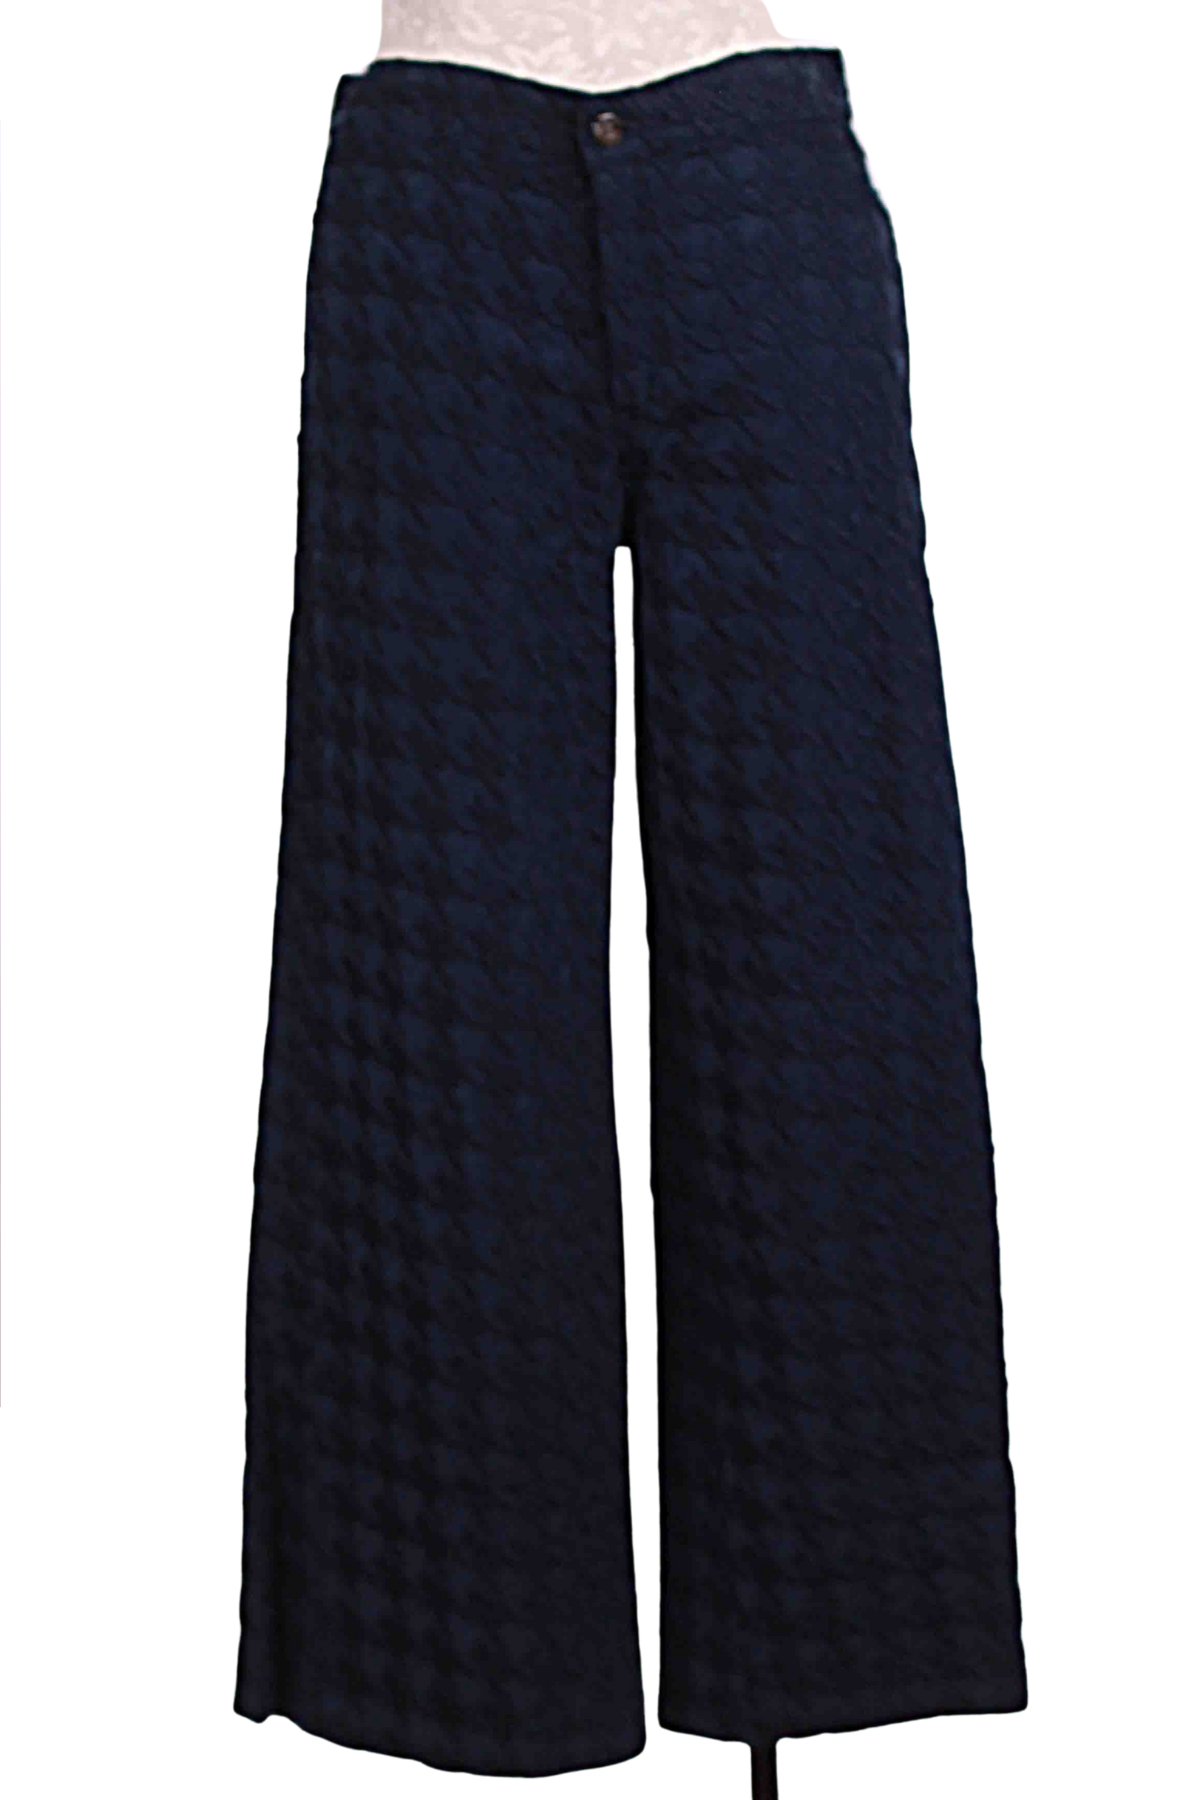 Blue Night Embroidered Hero Houndstooth Pant by Johnny Was